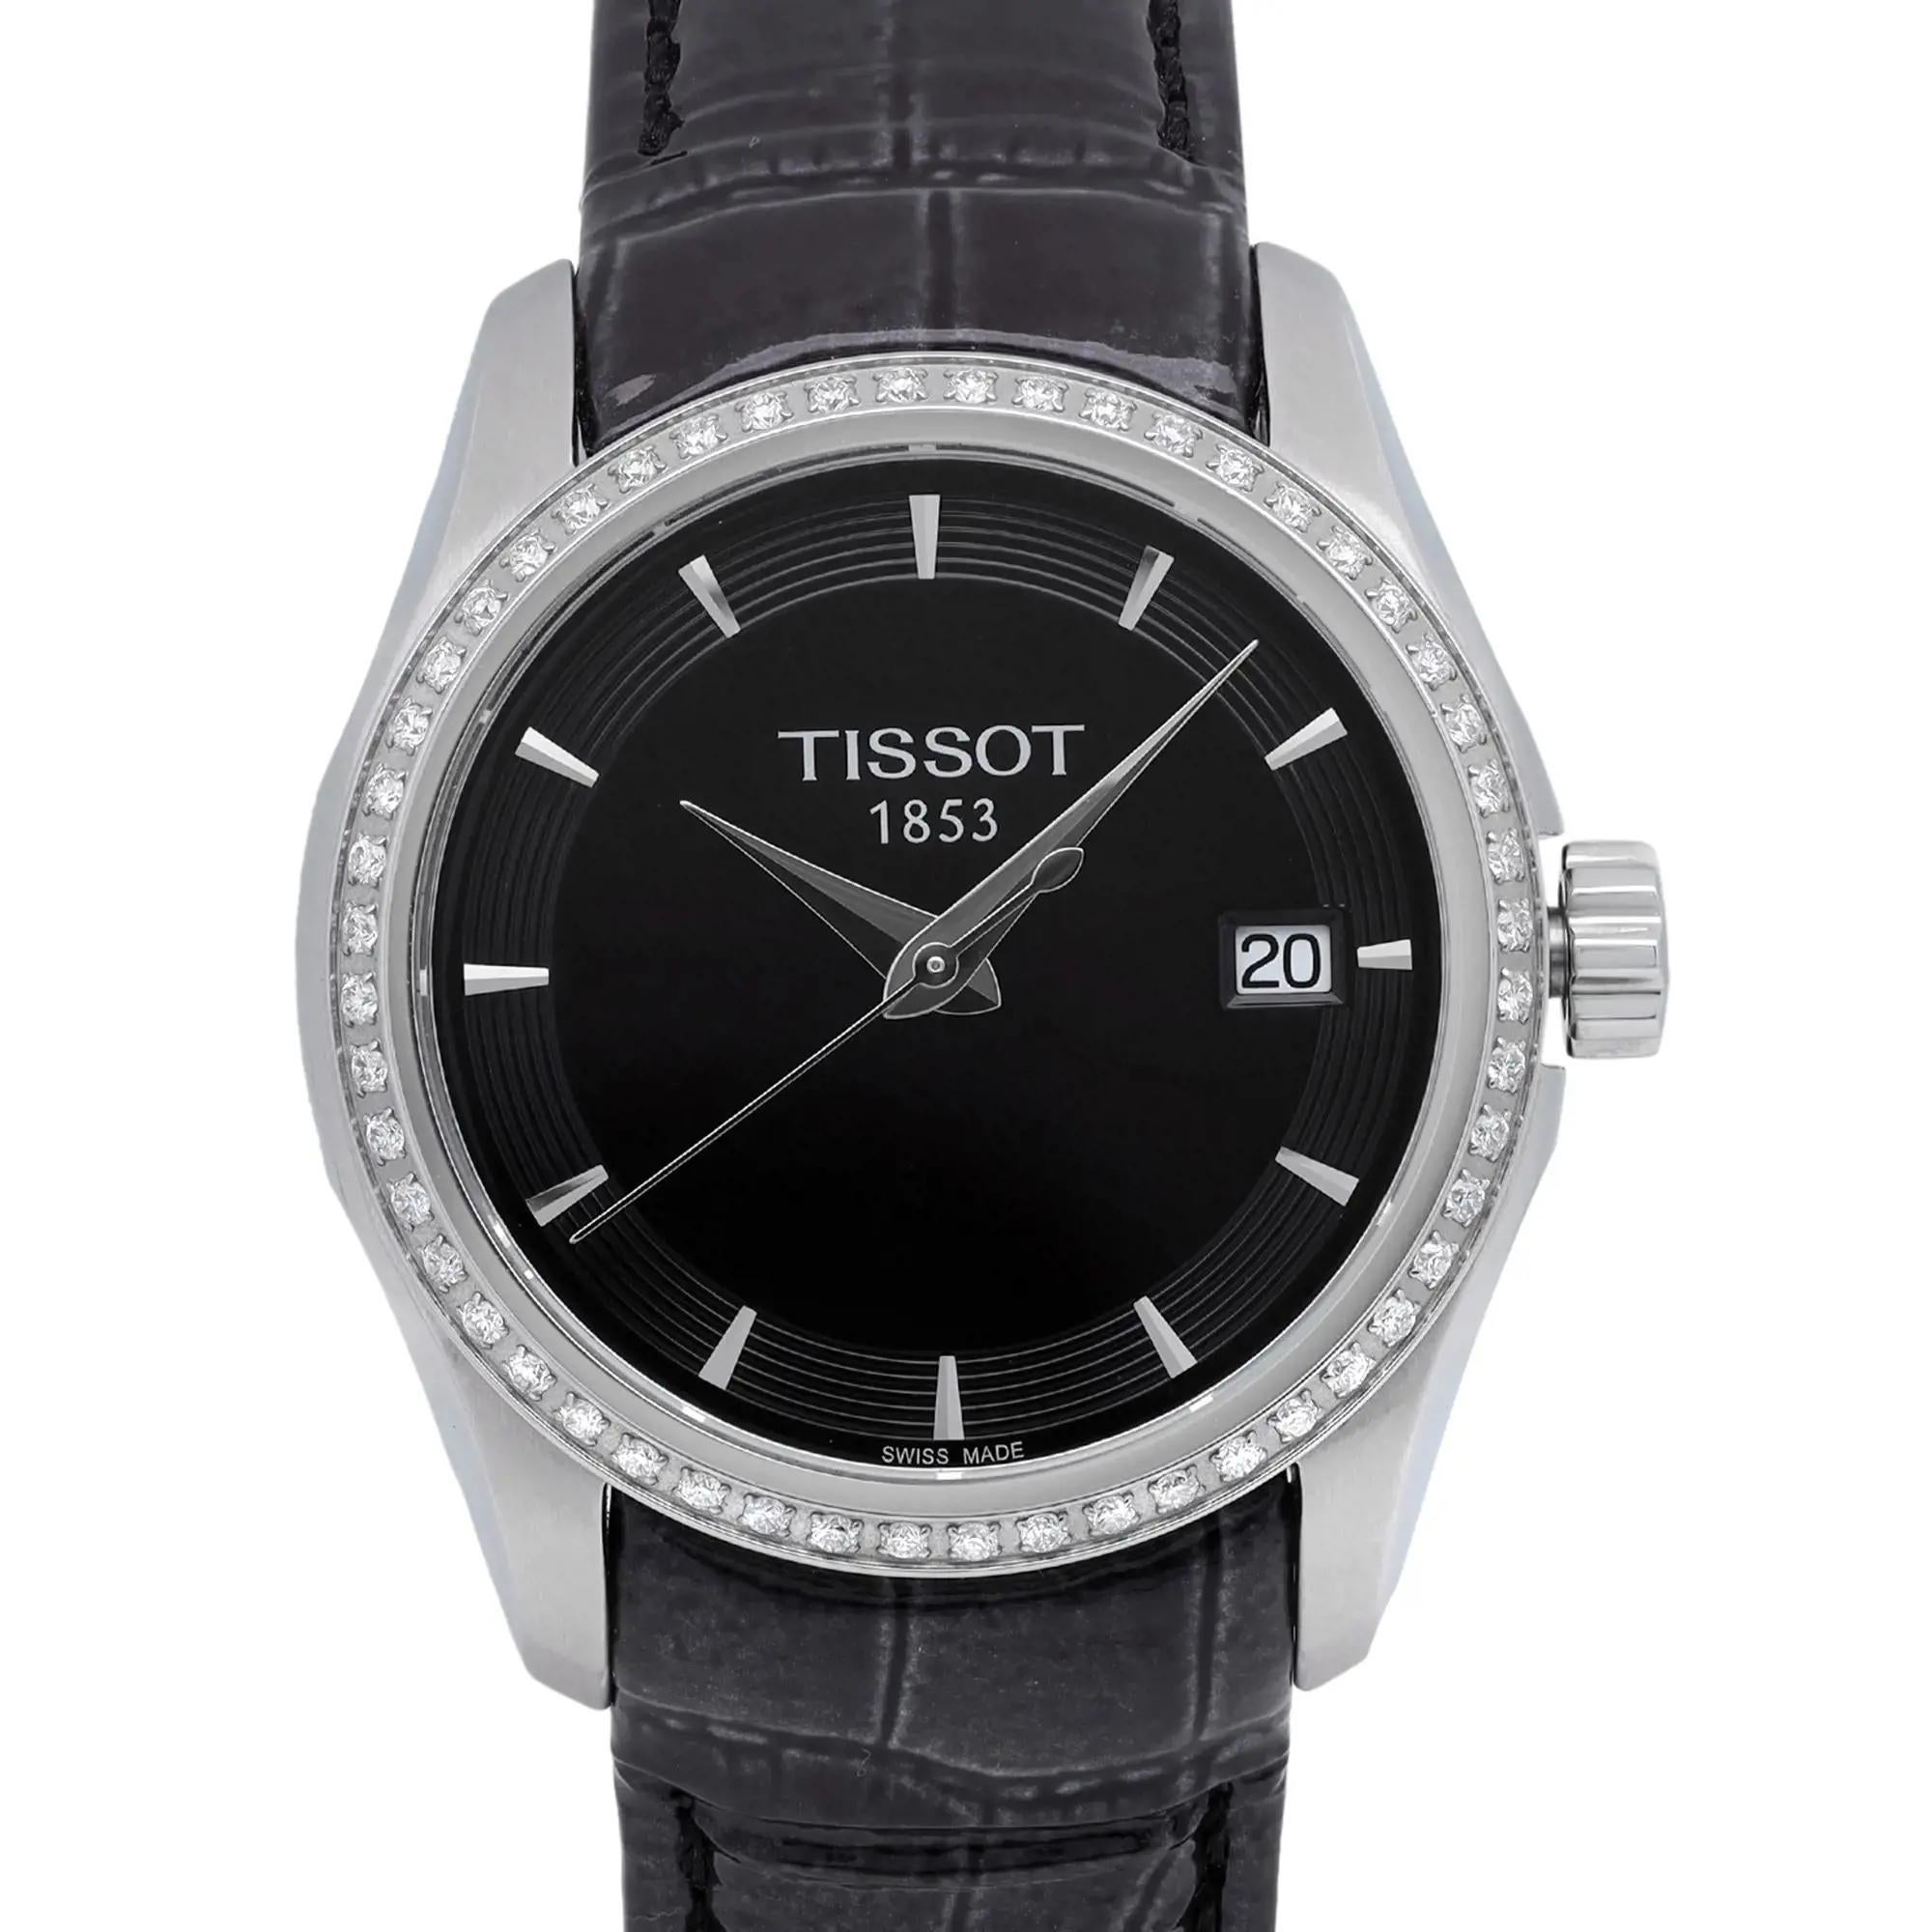 Unworn. Original box and papers are included. 

 Brand: Tissot  Type: Wristwatch  Department: Women  Model Number: T035.210.66.051.00  Country/Region of Manufacture: Switzerland  Style: Dress/Formal  Model: Tissot Couturier  Vintage: No  Movement: